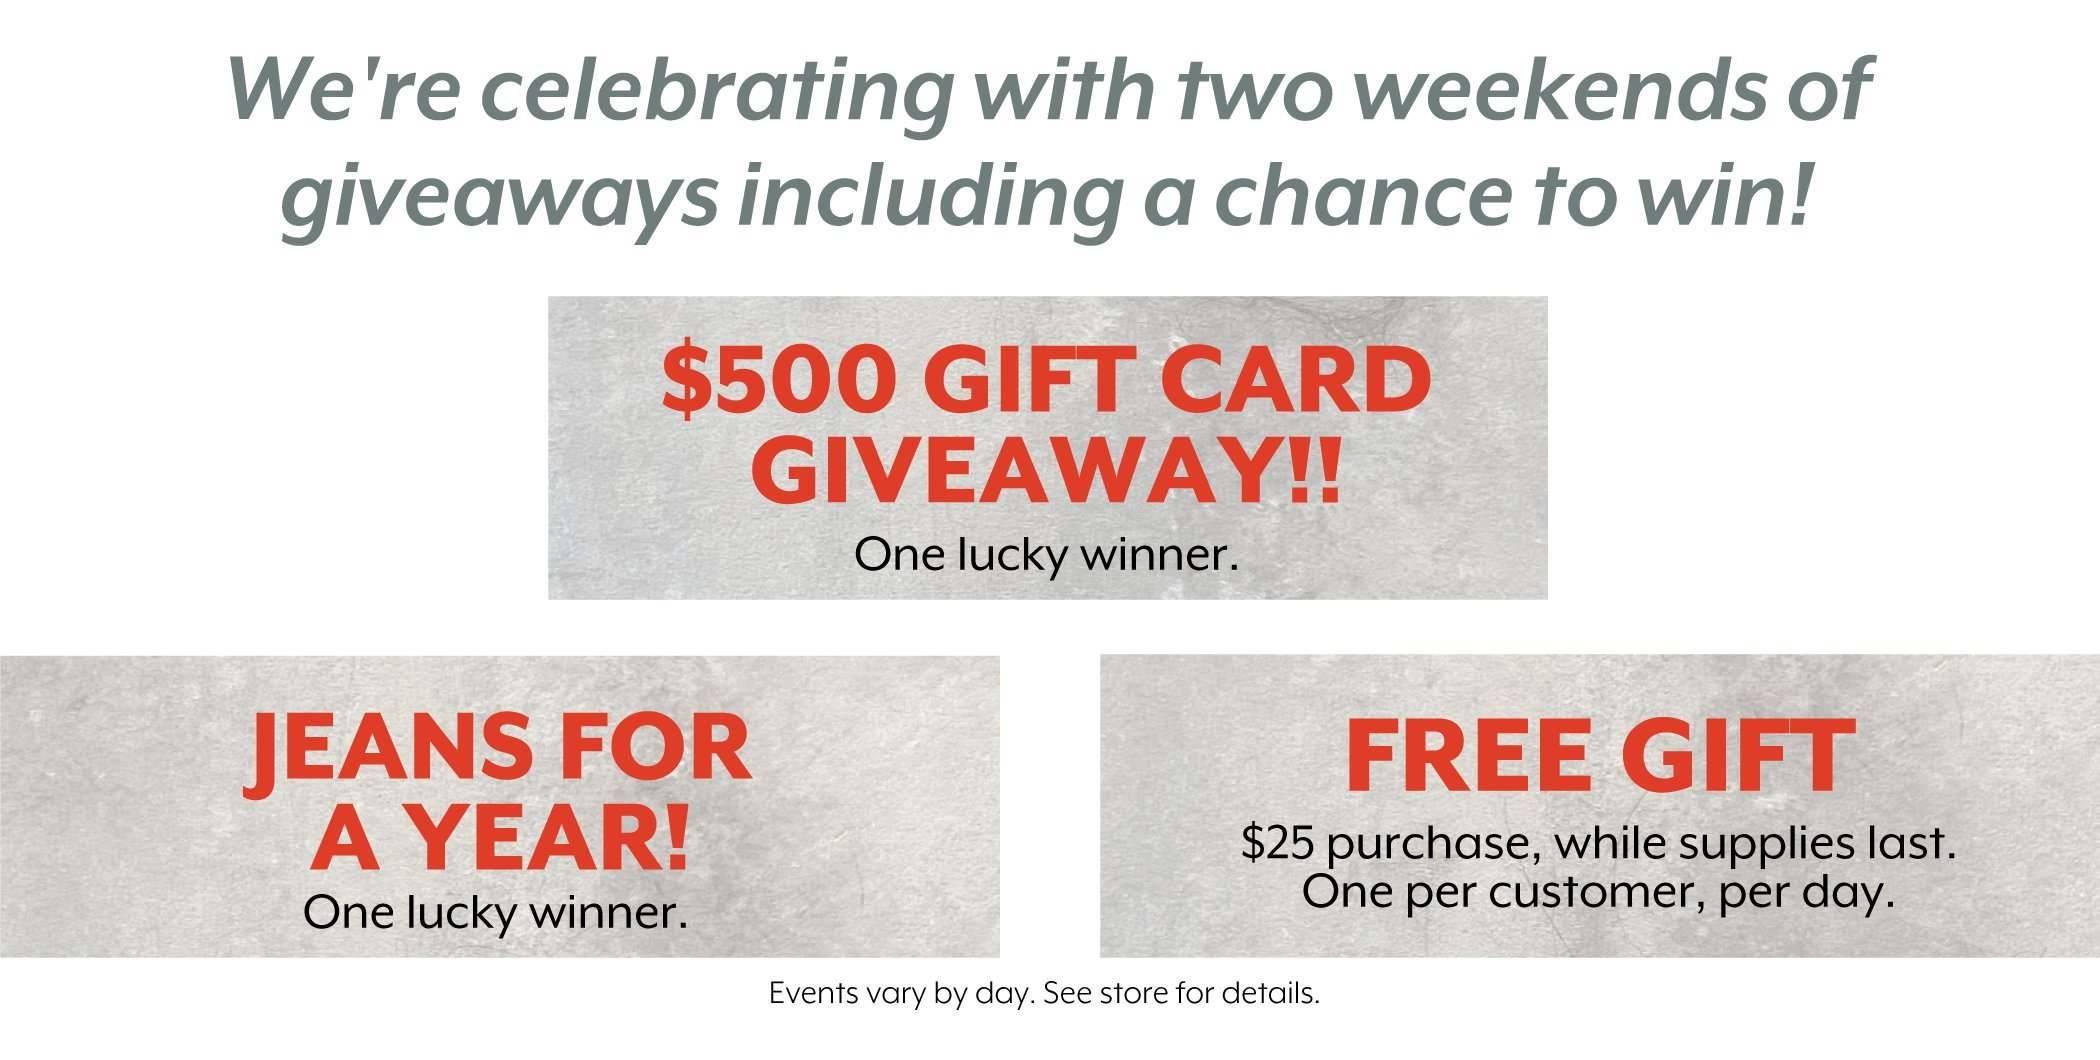 We're celebrating with two weekends of giveaways including a chance to win!